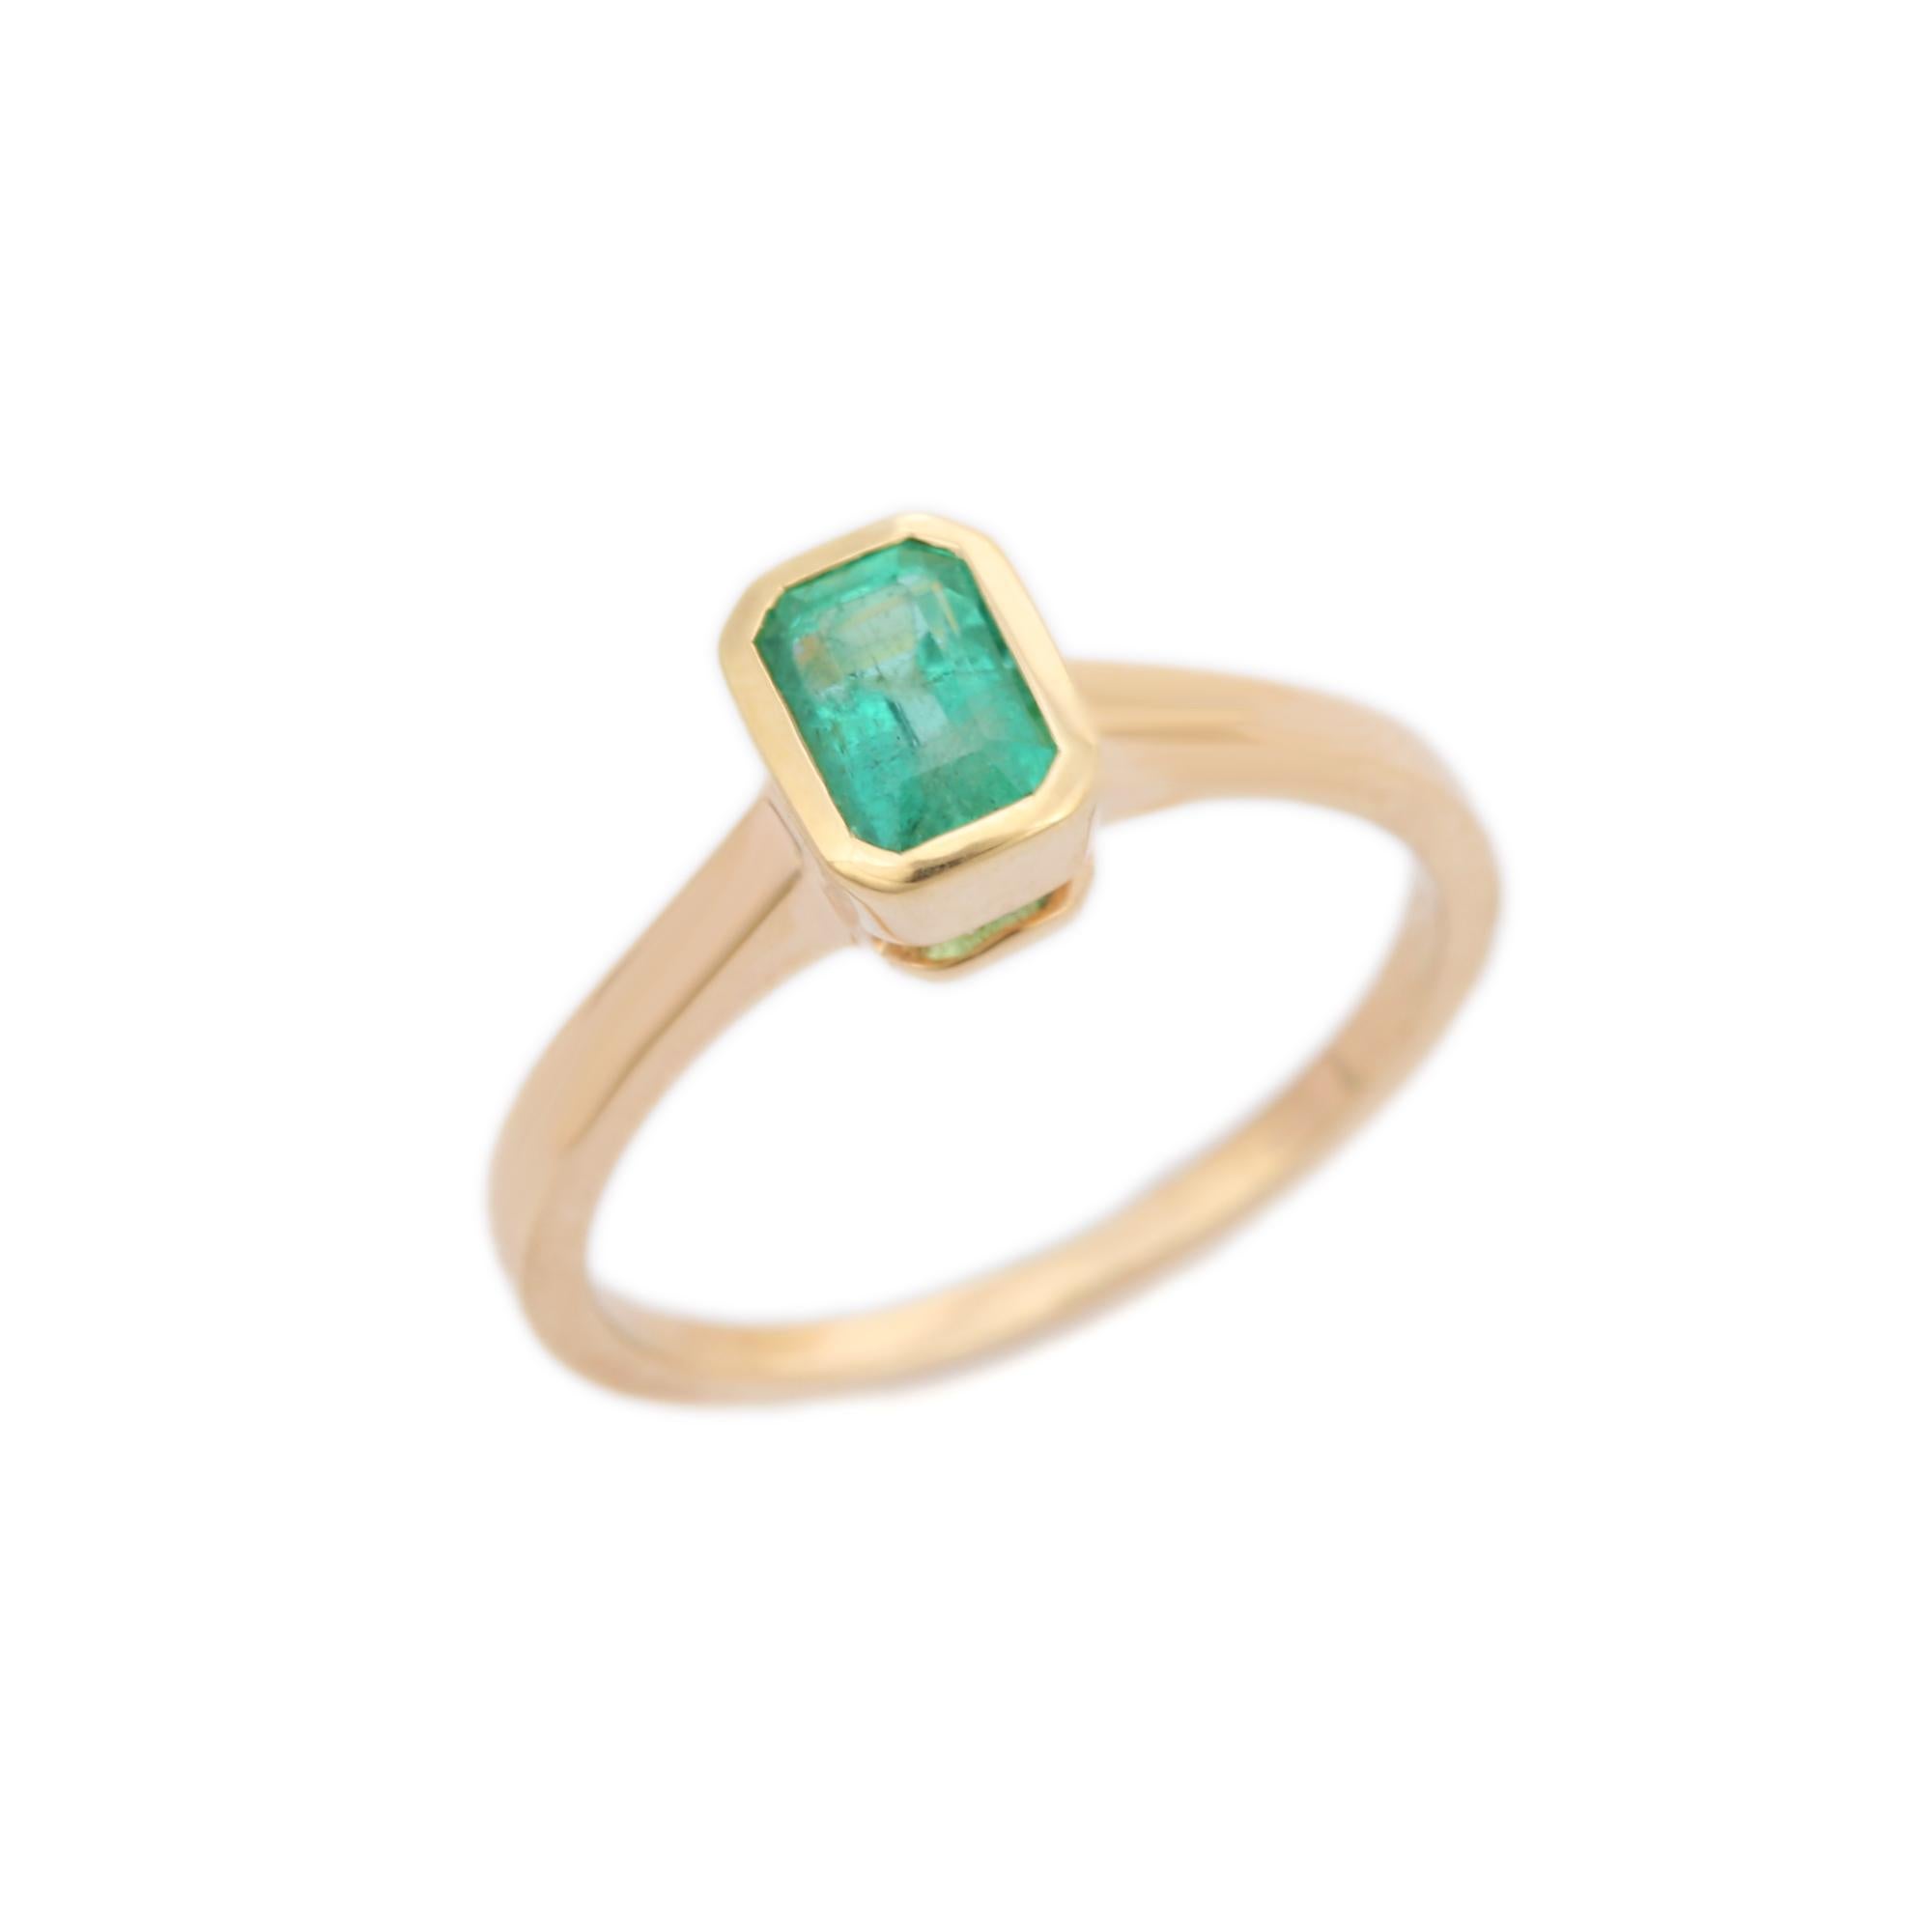 For Sale:  Handmade Bezel Set Emerald Single Stone Ring in 14k Solid Yellow Gold 5